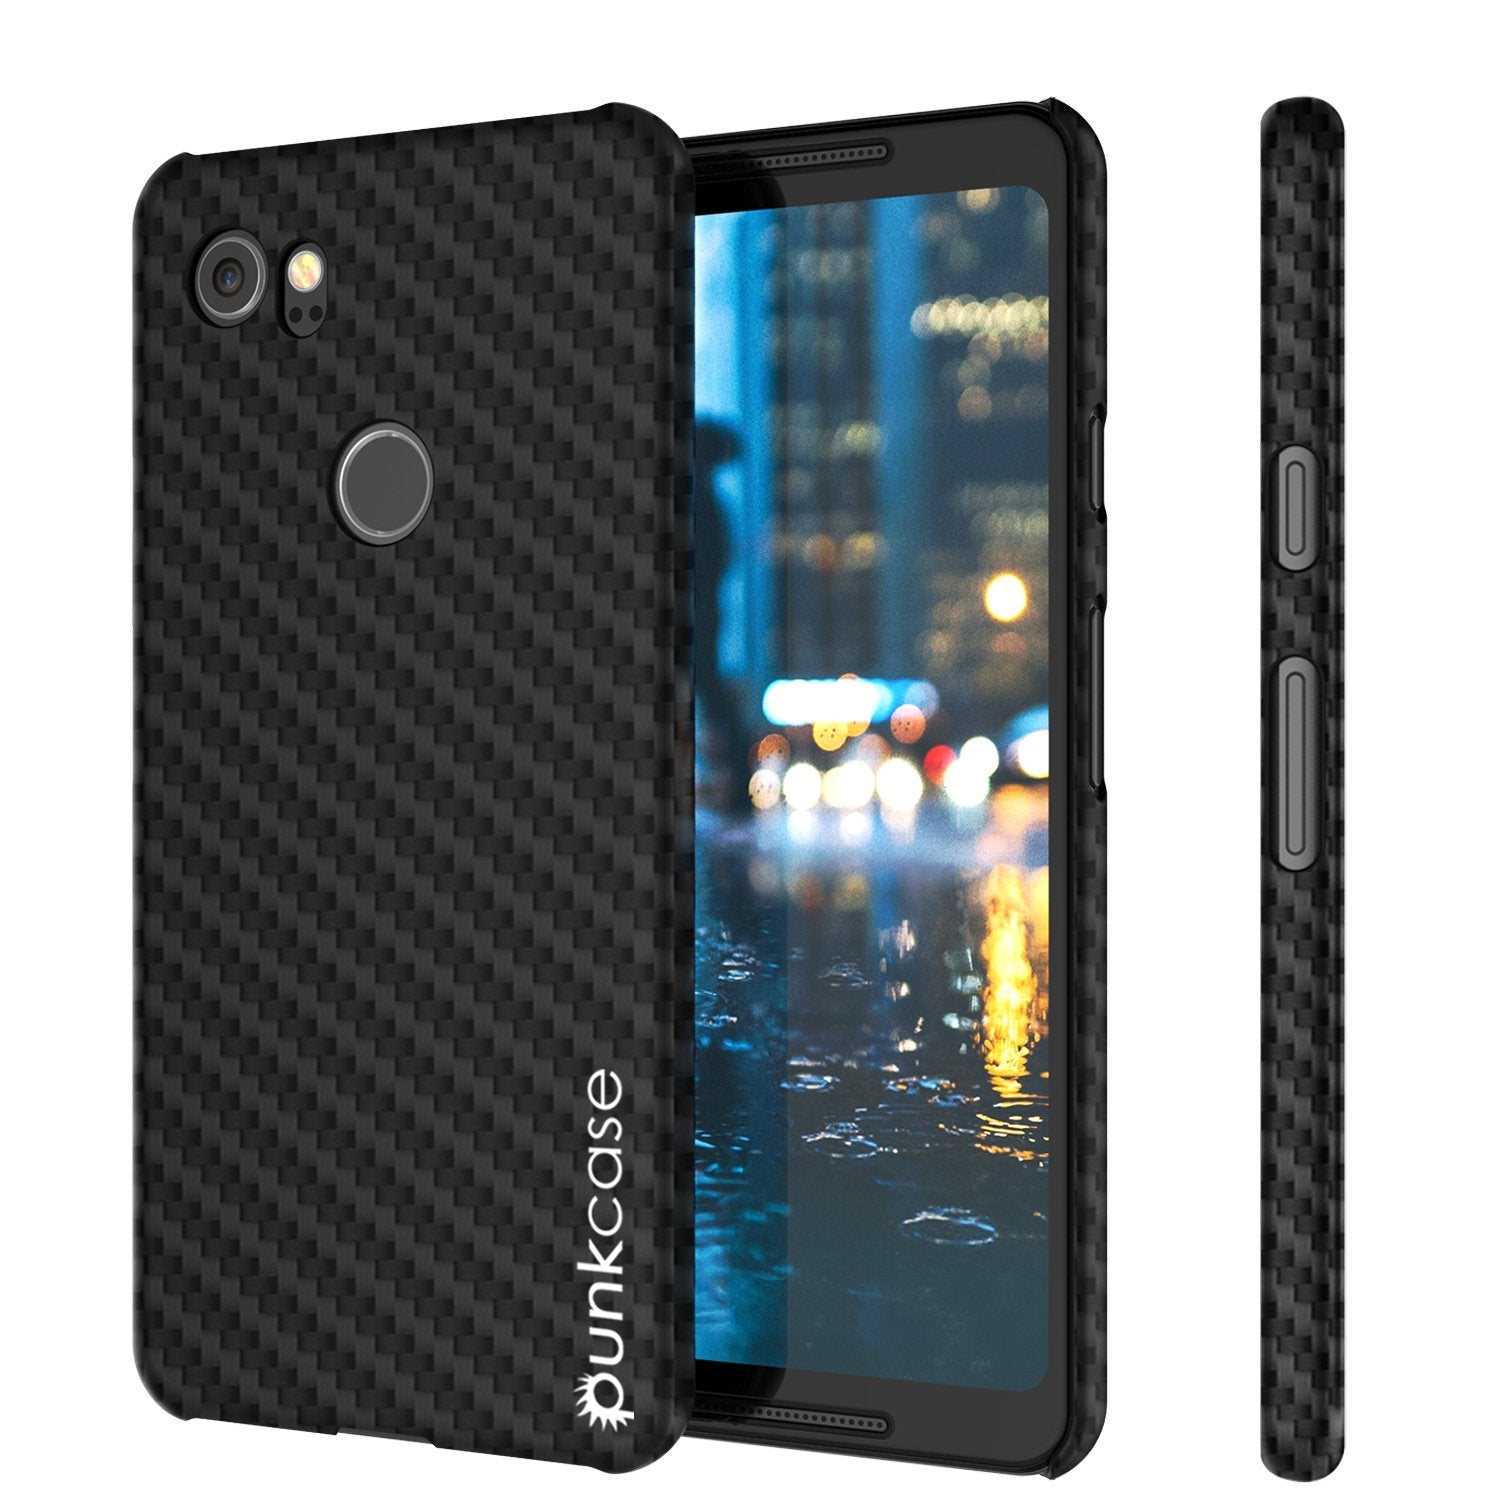 Google Pixel 2 XL  CarbonShield Heavy Duty Dual Layer PU Leather Cover